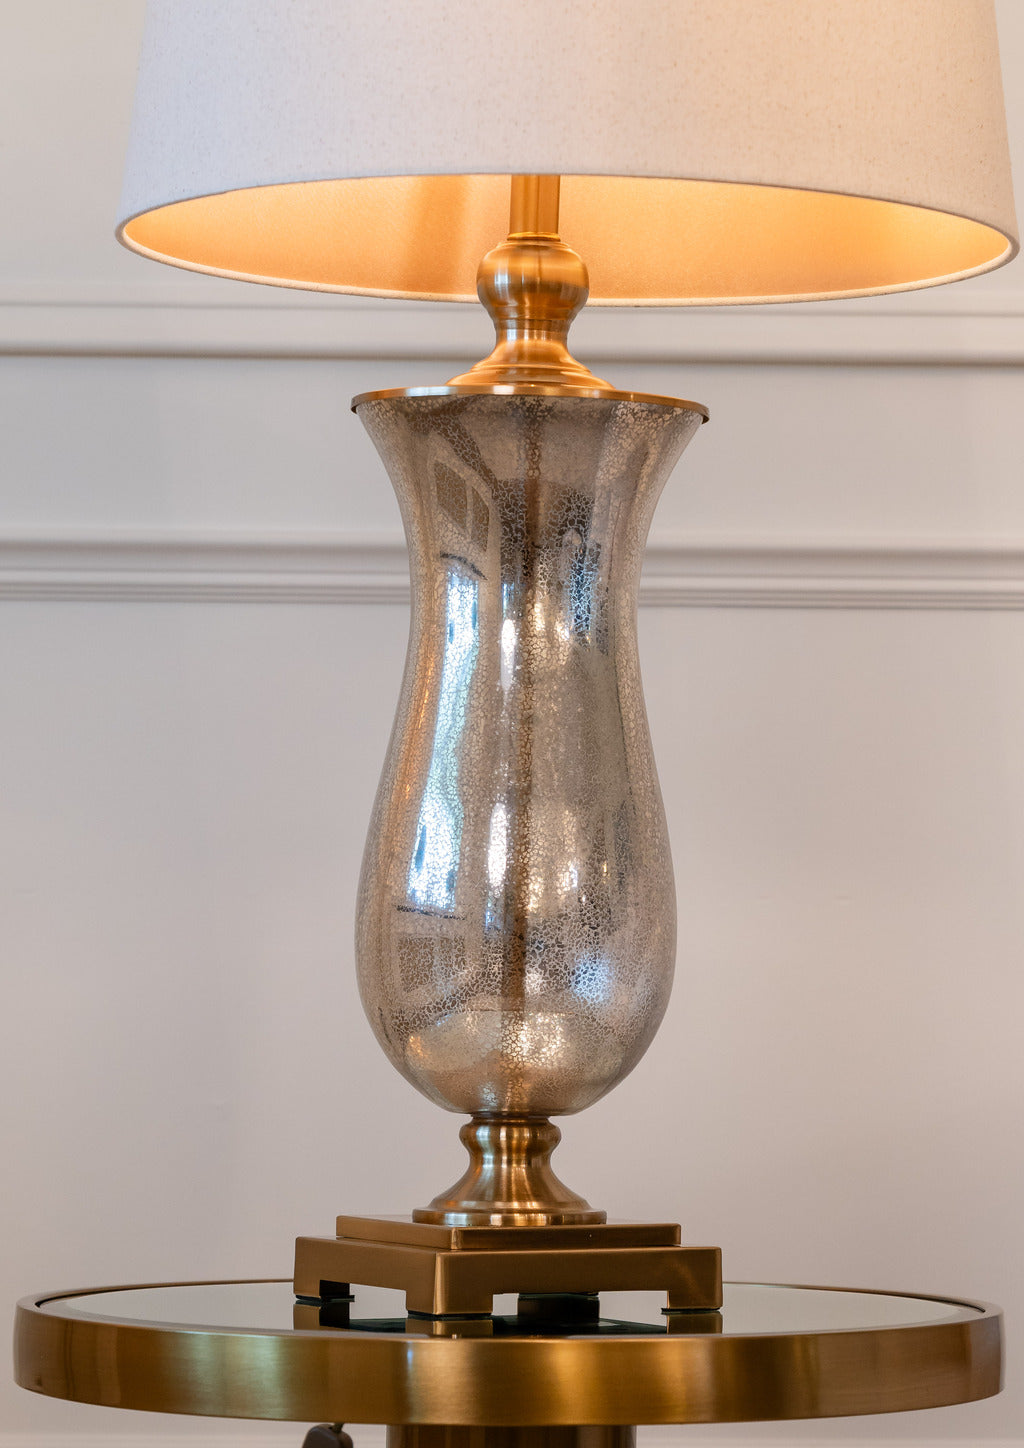 Gold table, Table lamp, Lighting, Gold lighting, gold furniture, Pink lampshade, Silver and gold